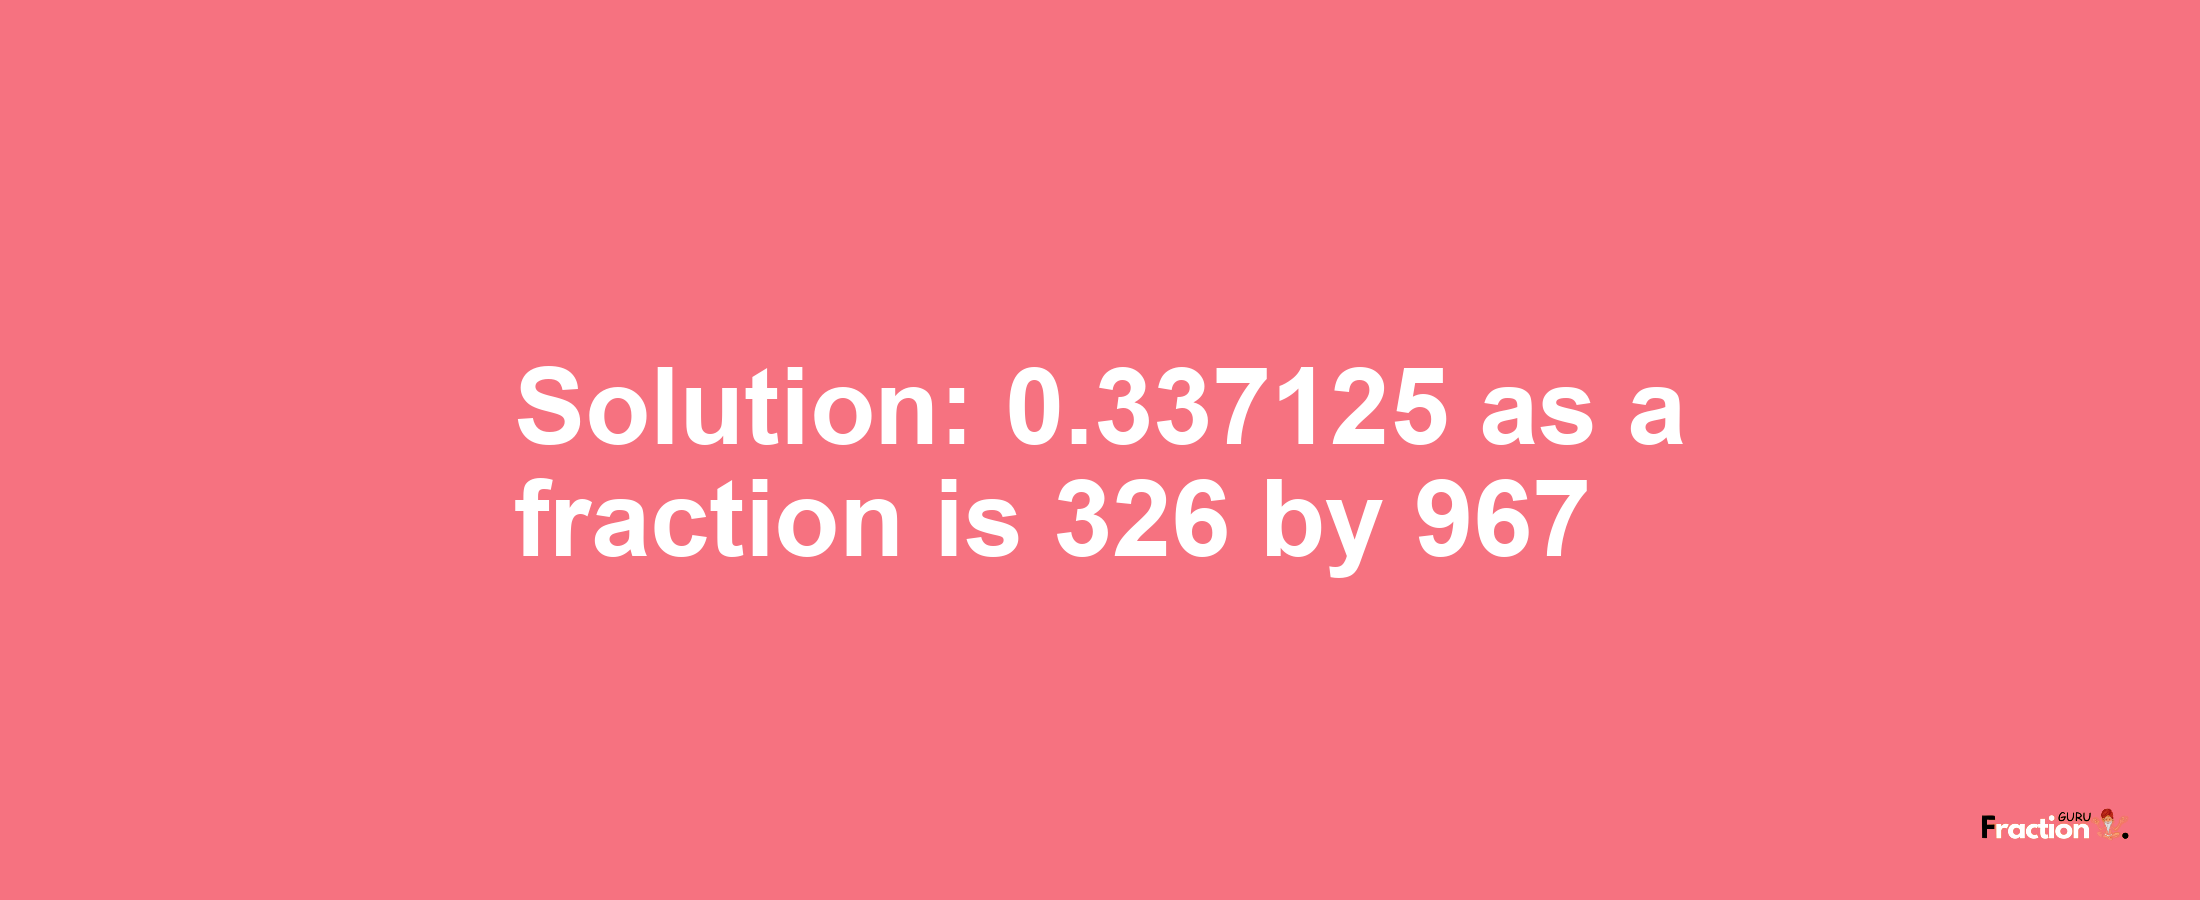 Solution:0.337125 as a fraction is 326/967